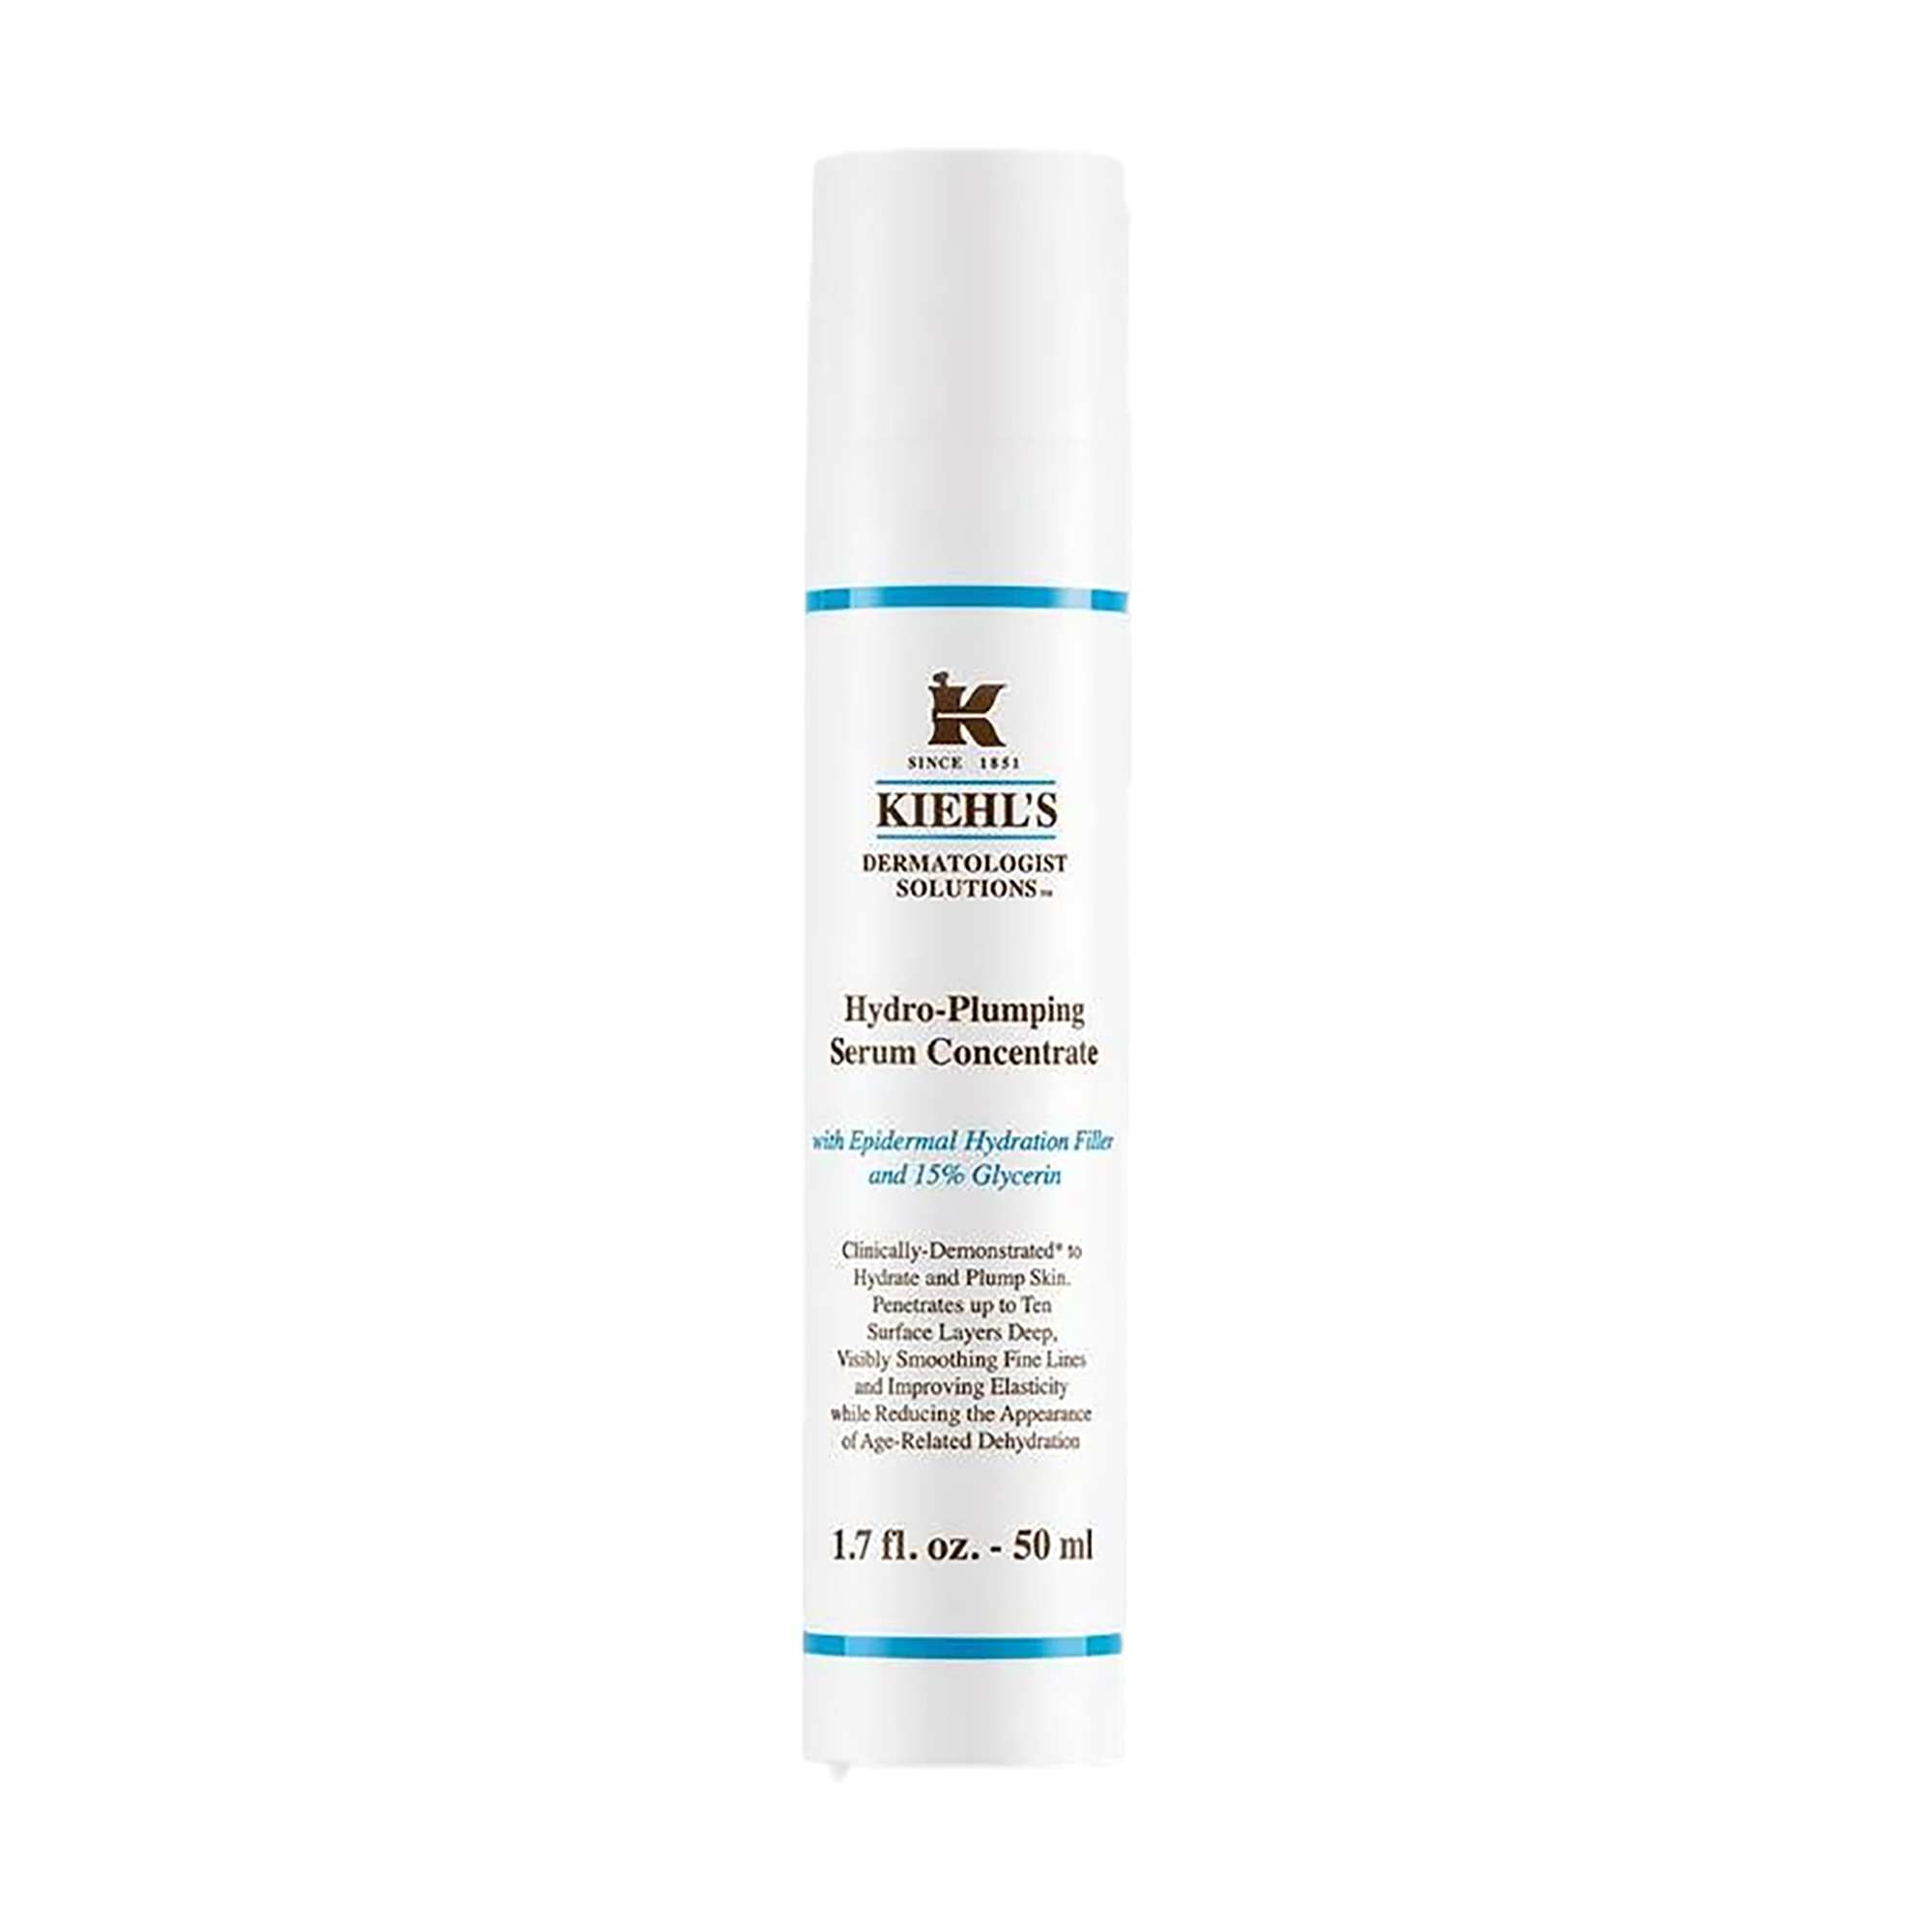 Kiehl's Hydro-Plumping Hydrating Serum Concentrate / 1.7OZ